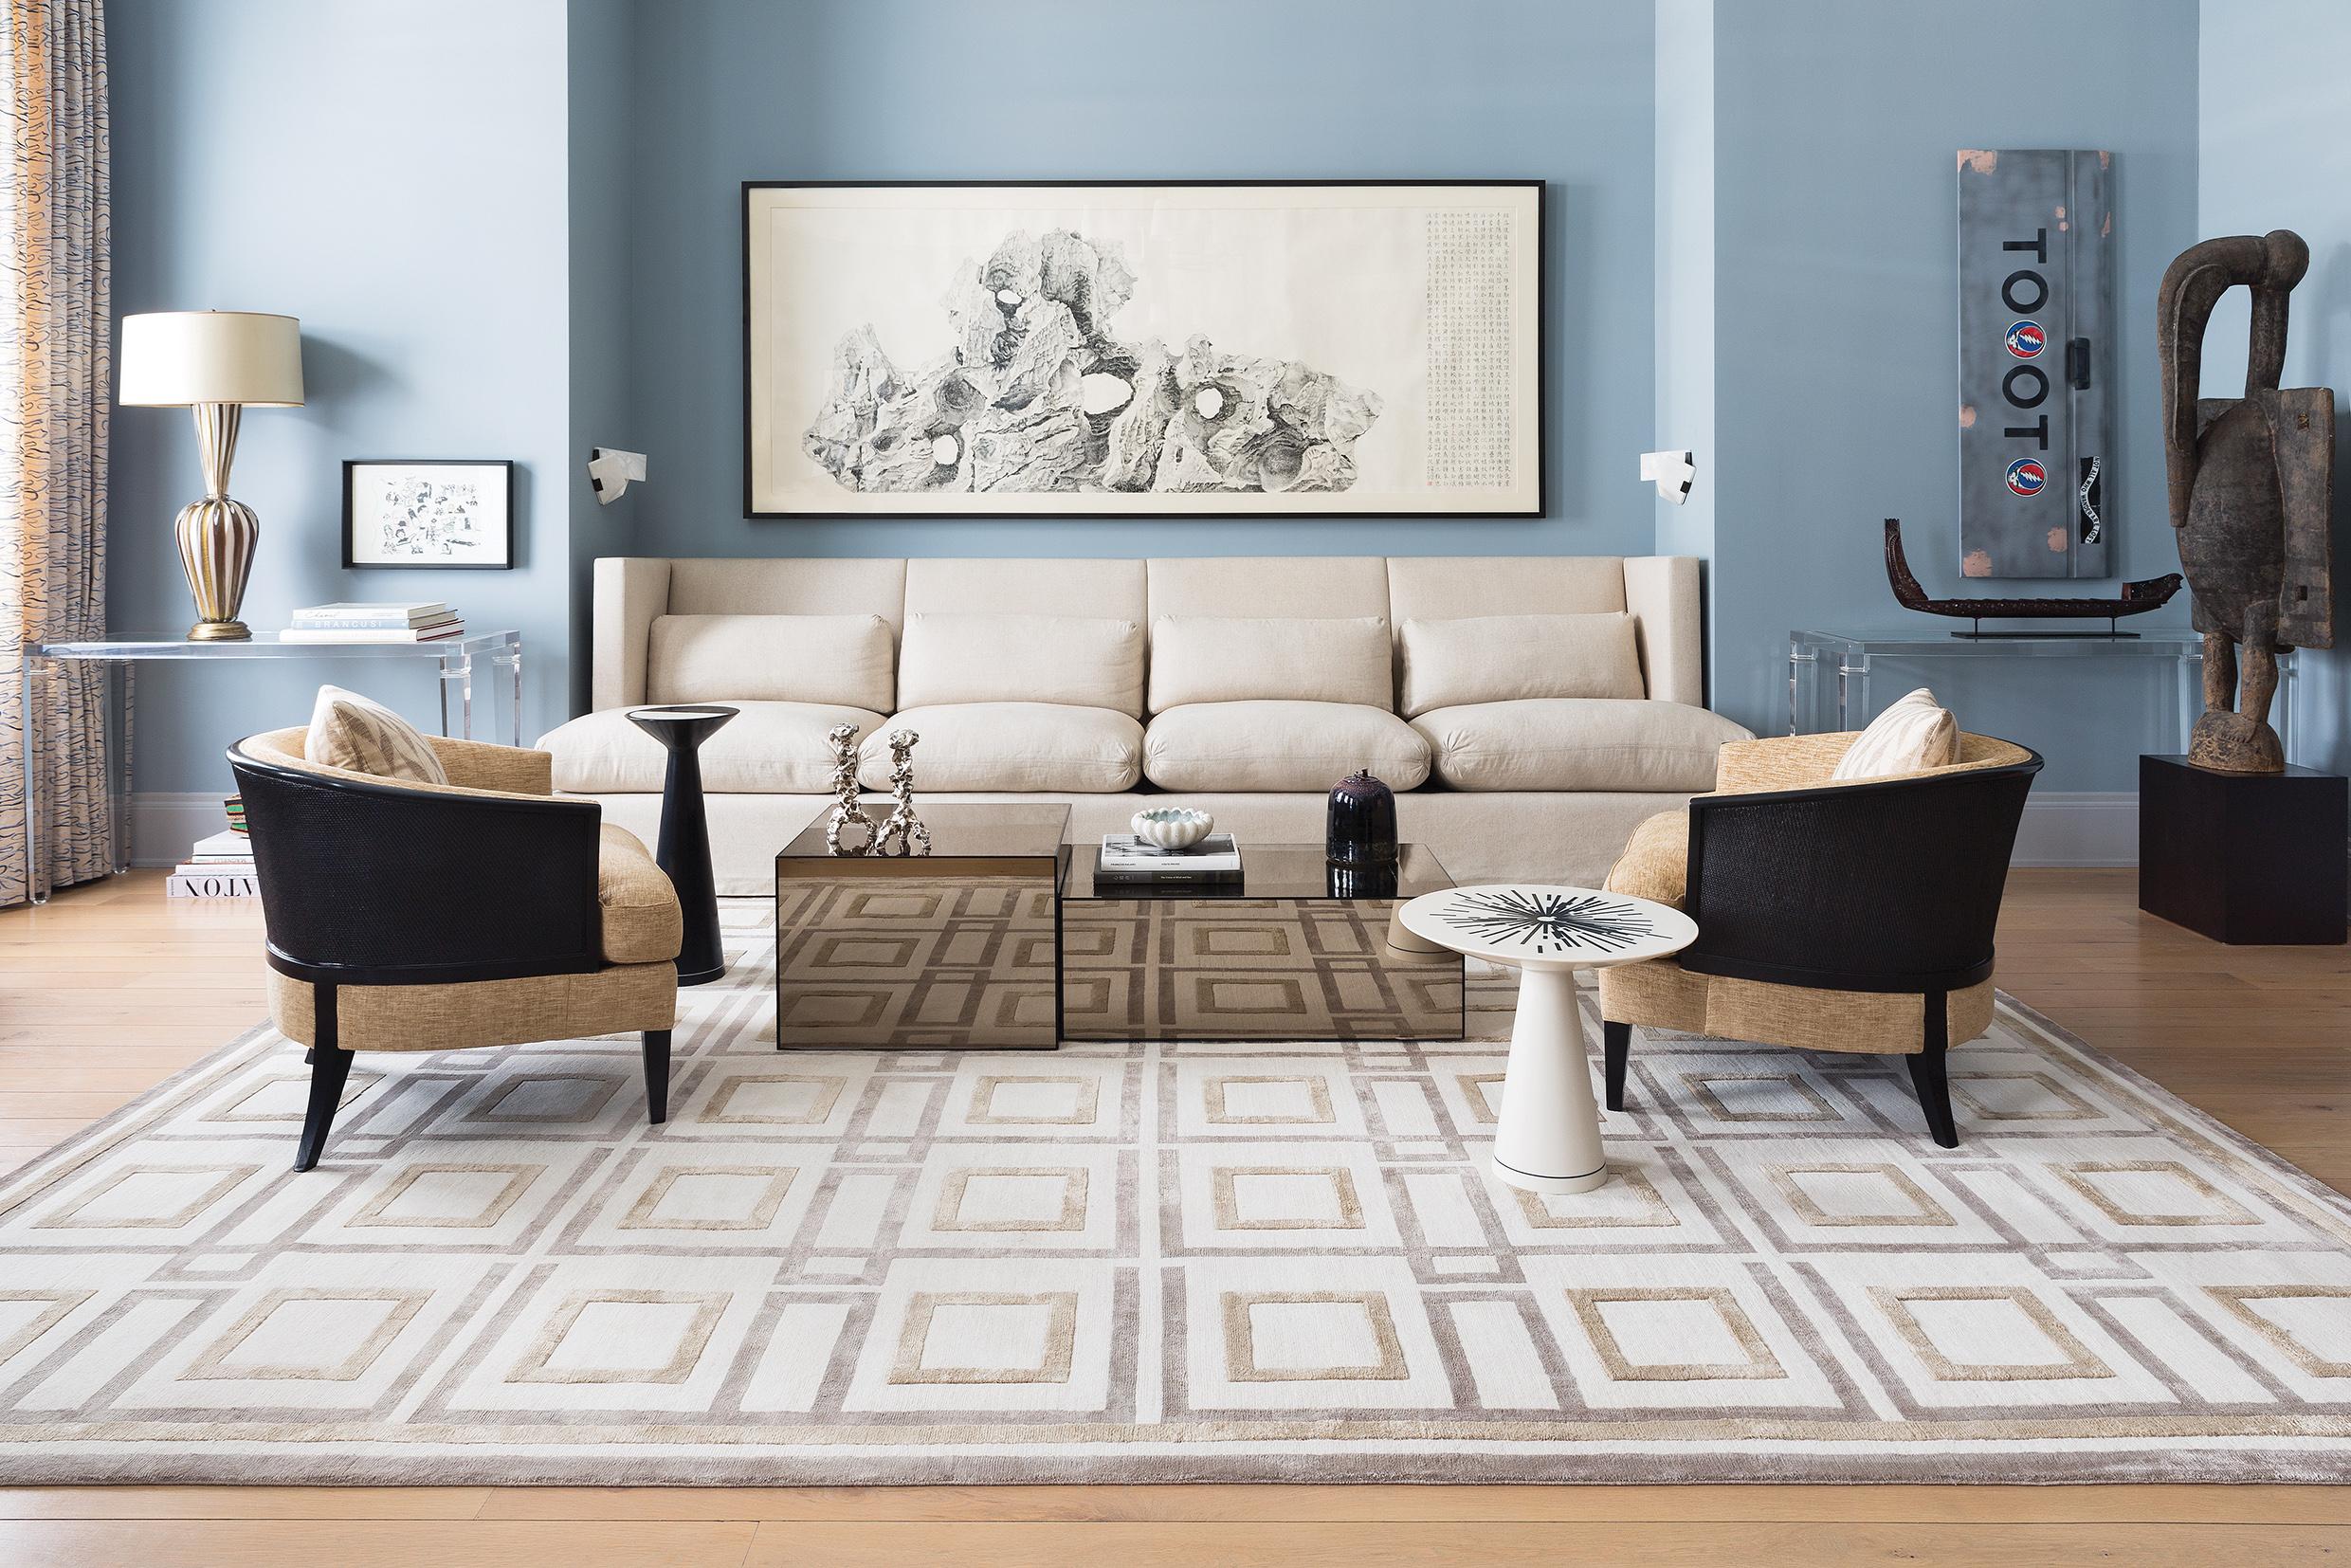 Featuring subtle graphic squares Hand-knotted in raised silk and created in a pared back color palette, Madison is inspired by Manhattan’s angularity and cosmopolitan point of view and pays homage to the city Nunnerley calls home. Nunnerley’s